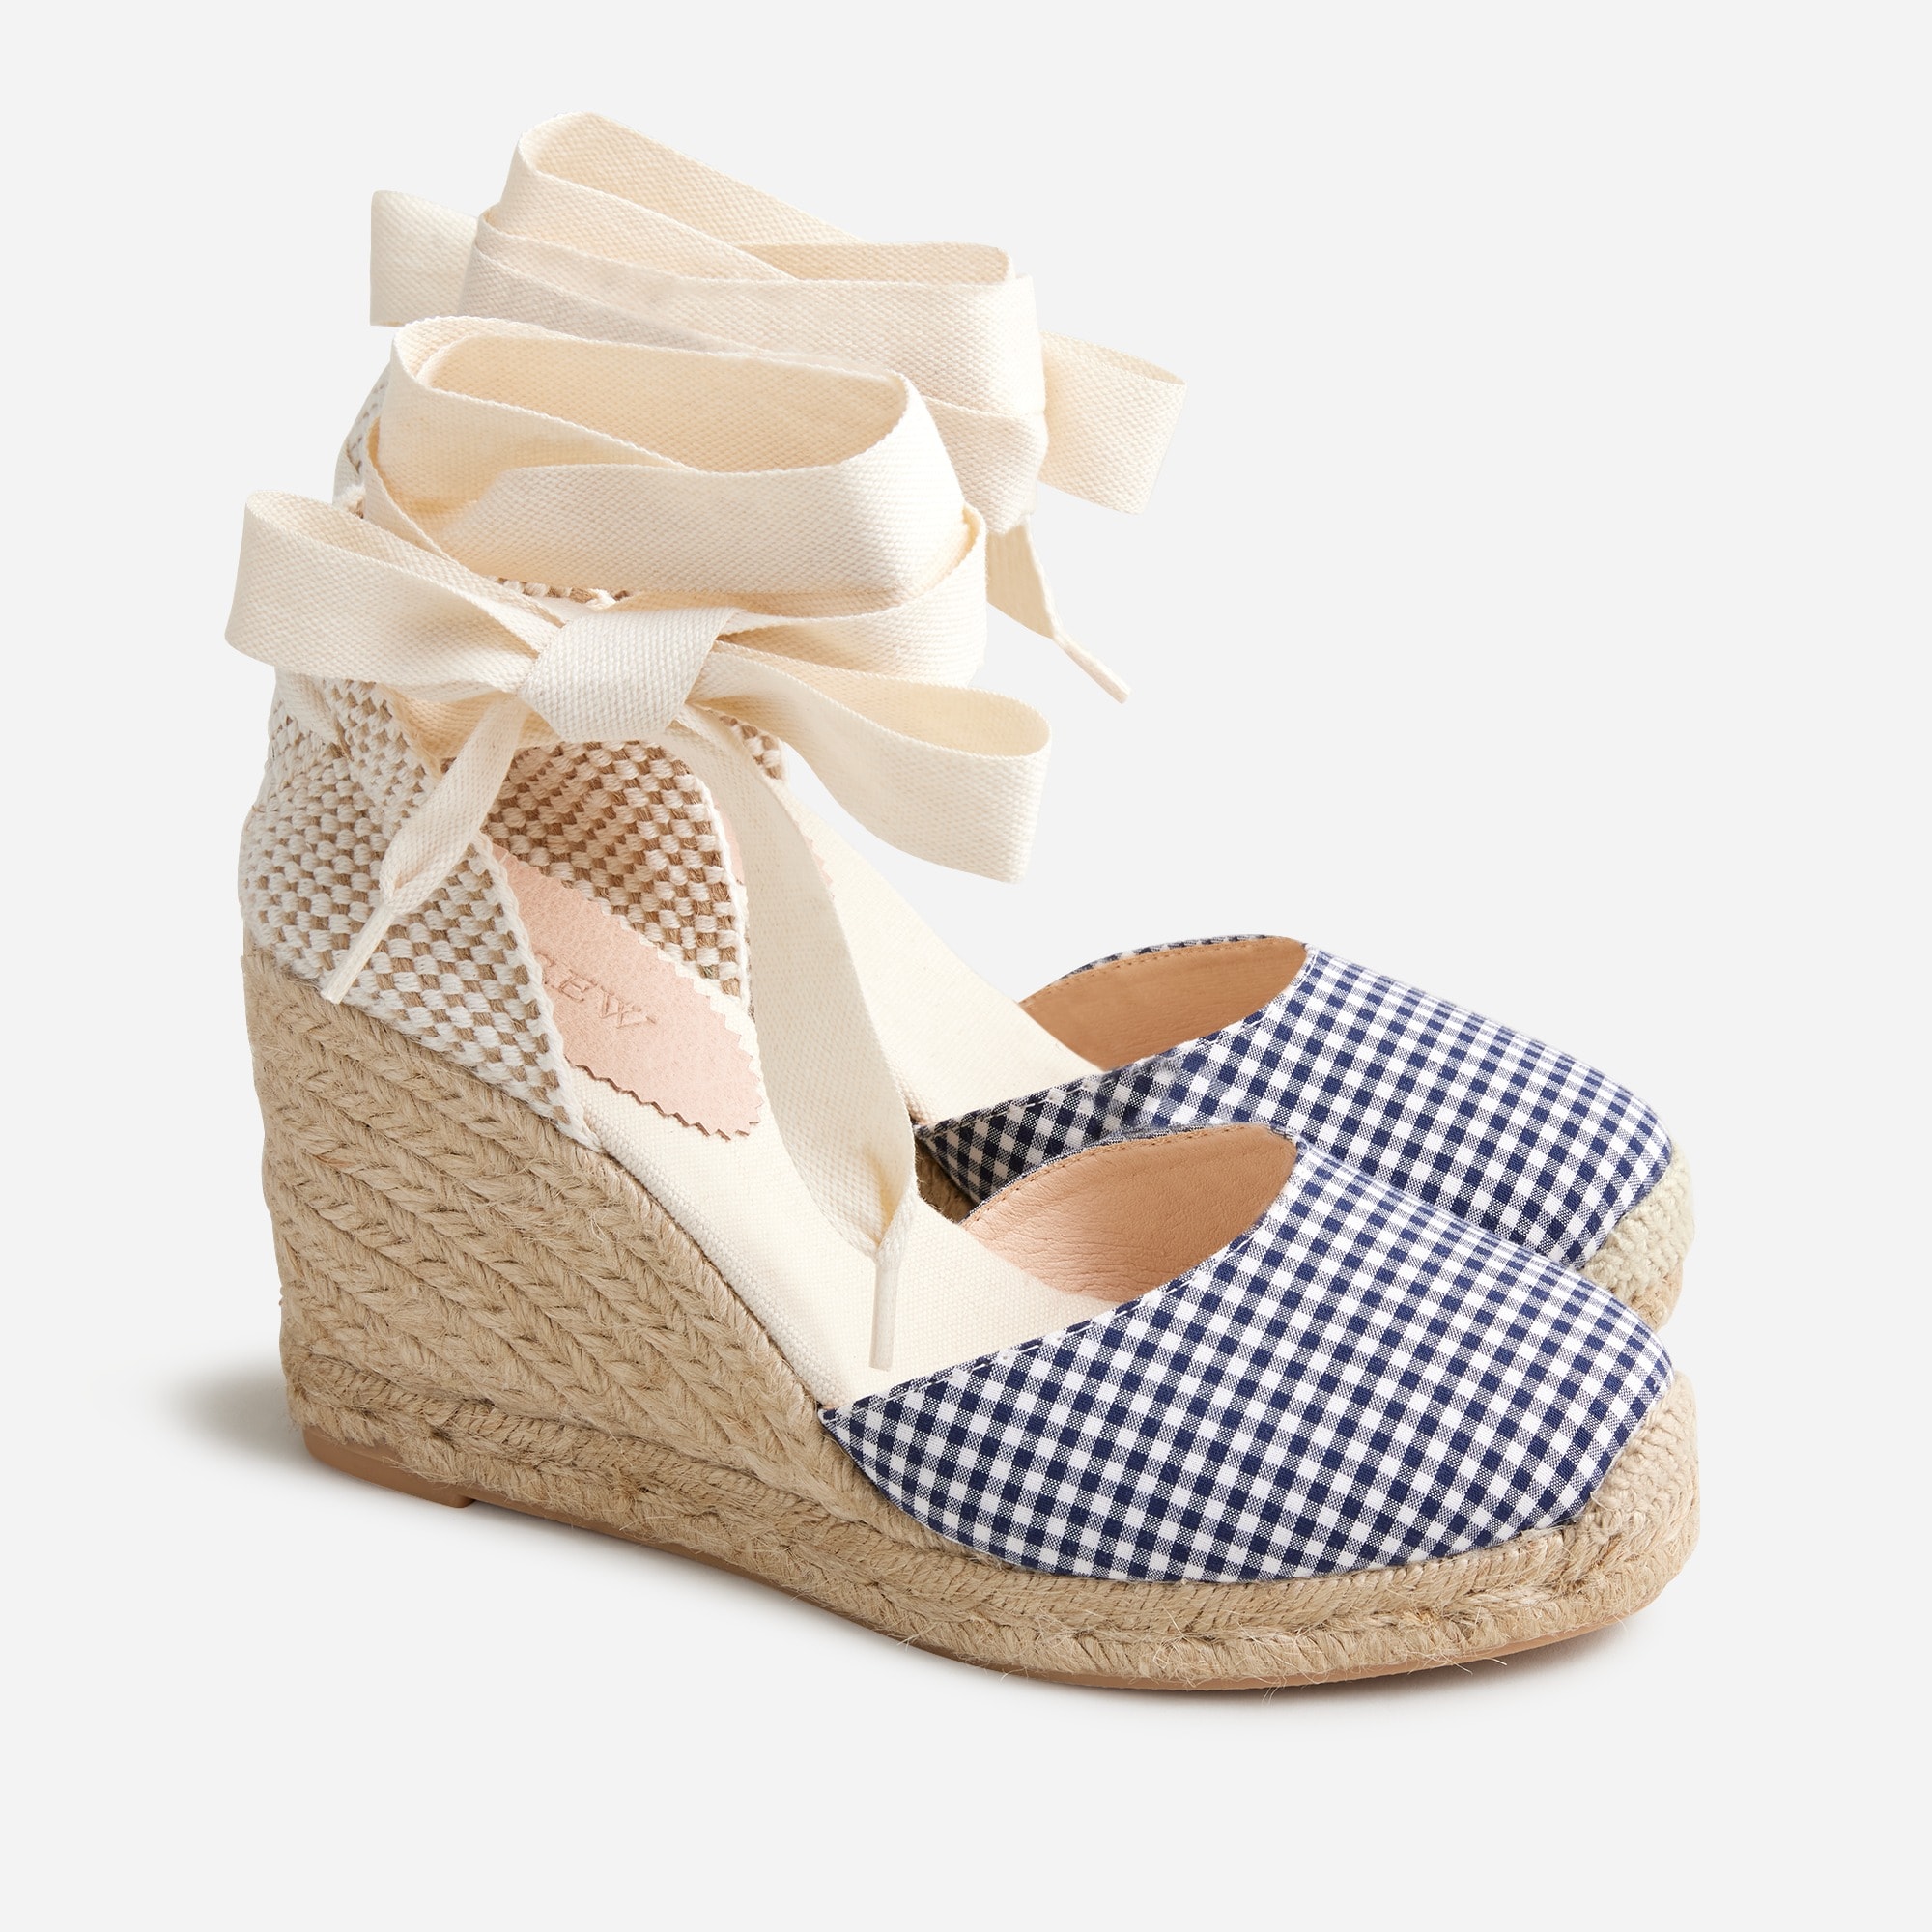 J.Crew: Made-in-Spain Lace-up High-heel Espadrilles In Gingham For Women